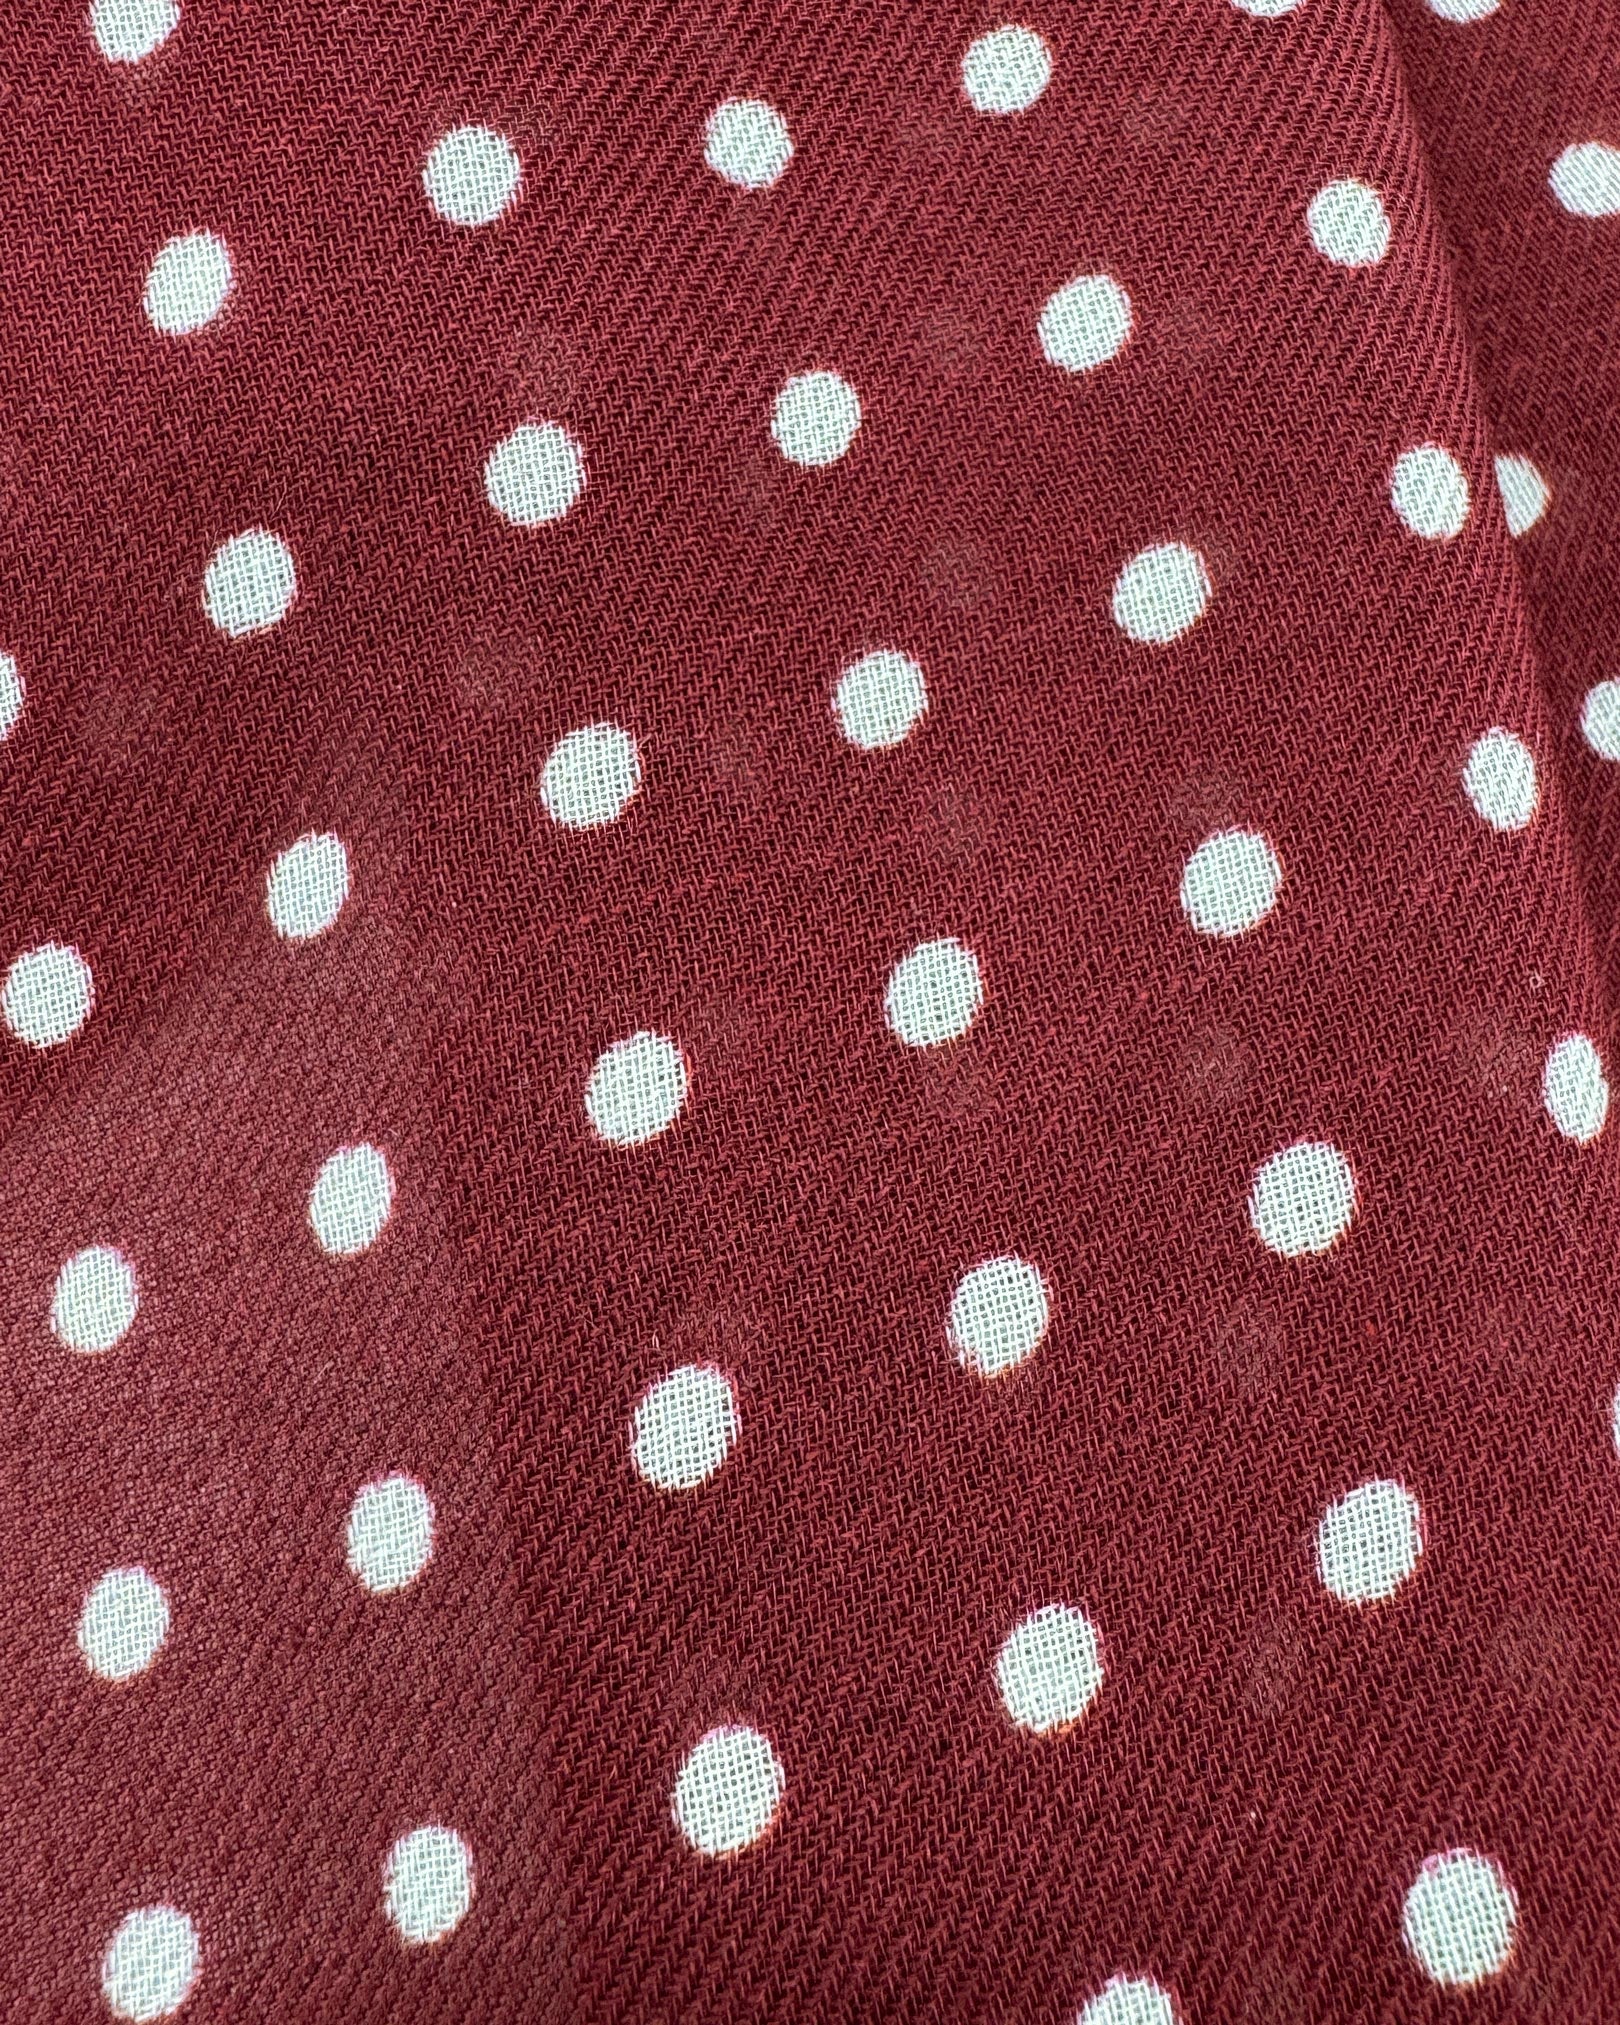 A flat, close up view of 'The Sapporo' wide scarf. Clearly showing the modal and wool fabric and attractive white polka dot pattern against a burgundy background.